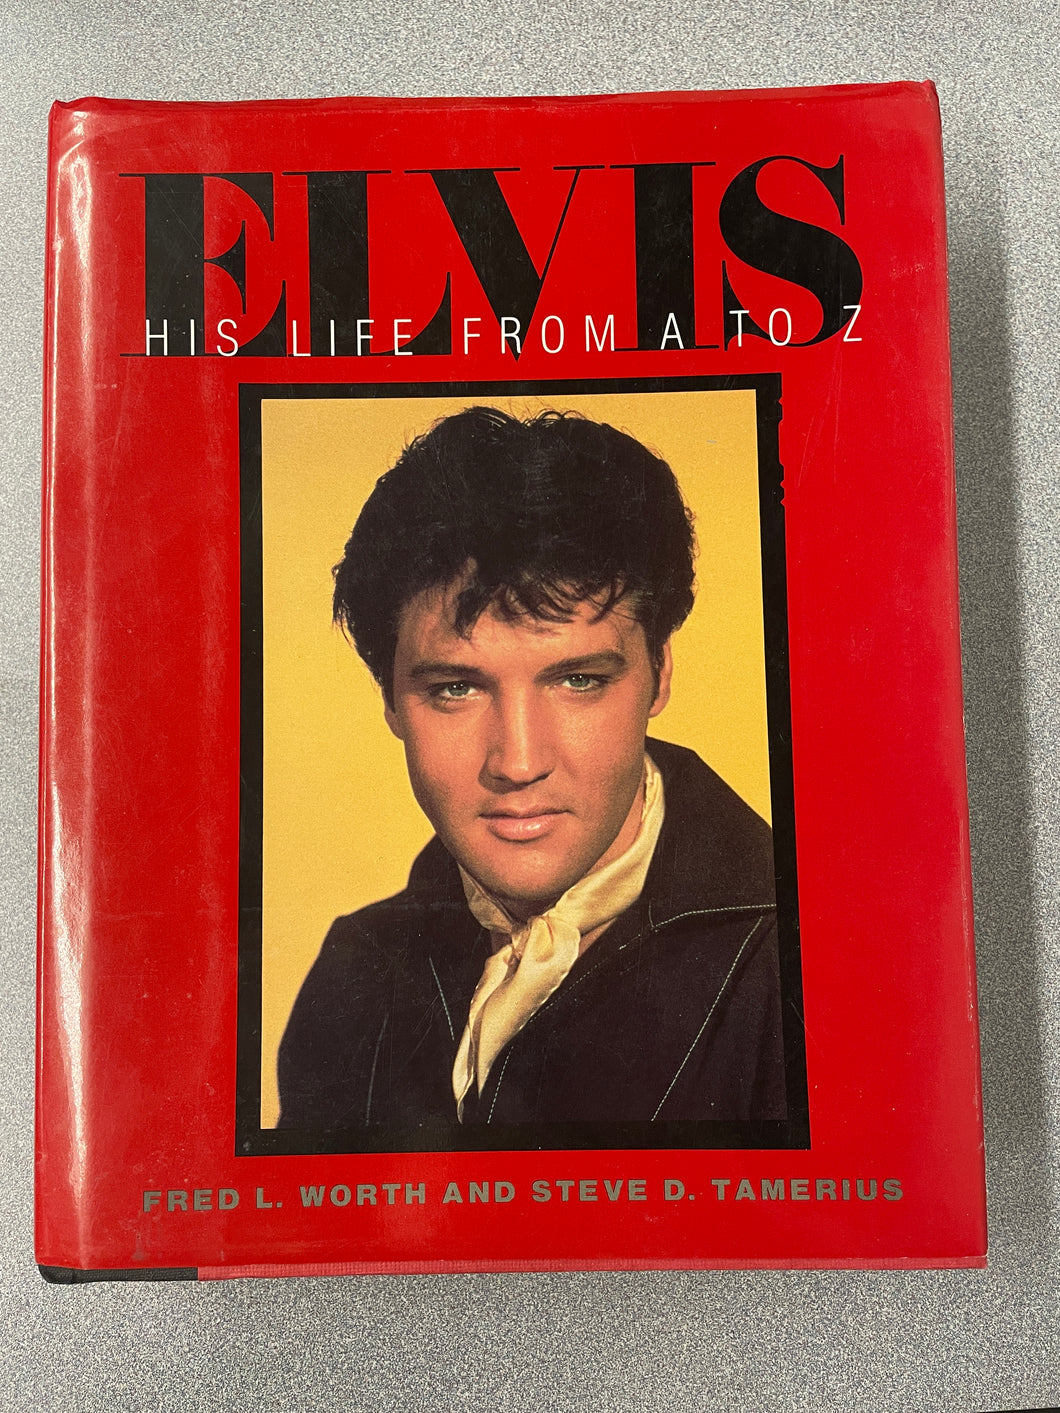 Elvis: His Life From A To Z, Worth, Fred L. and Steve D. Tamerium [1992] EP 12/23